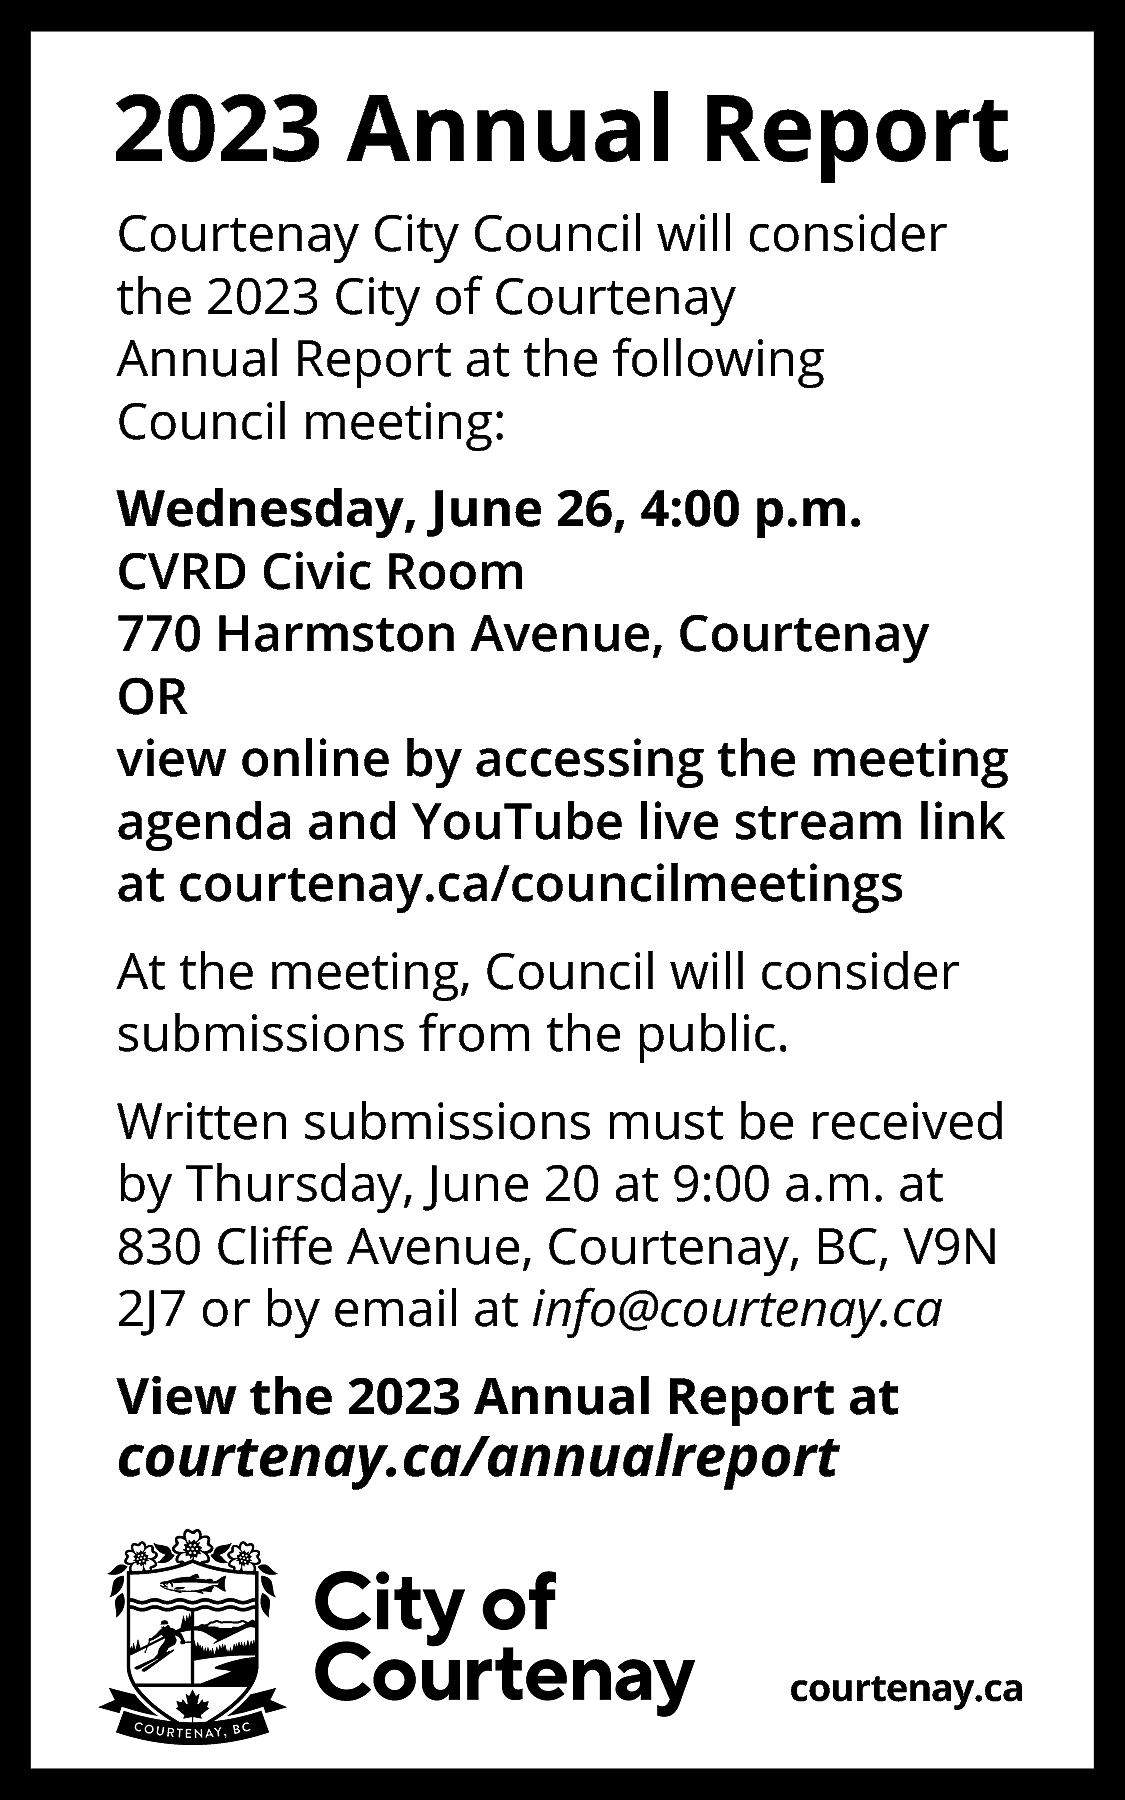 2023 Annual Report <br>Courtenay City  2023 Annual Report  Courtenay City Council will consider  the 2023 City of Courtenay  Annual Report at the following  Council meeting:  Wednesday, June 26, 4:00 p.m.  CVRD Civic Room  770 Harmston Avenue, Courtenay  OR  view online by accessing the meeting  agenda and YouTube live stream link  at courtenay.ca/councilmeetings  At the meeting, Council will consider  submissions from the public.  Written submissions must be received  by Thursday, June 20 at 9:00 a.m. at  830 Cliﬀe Avenue, Courtenay, BC, V9N  2J7 or by email at info@courtenay.ca  View the 2023 Annual Report at    courtenay.ca/annualreport    courtenay.ca    